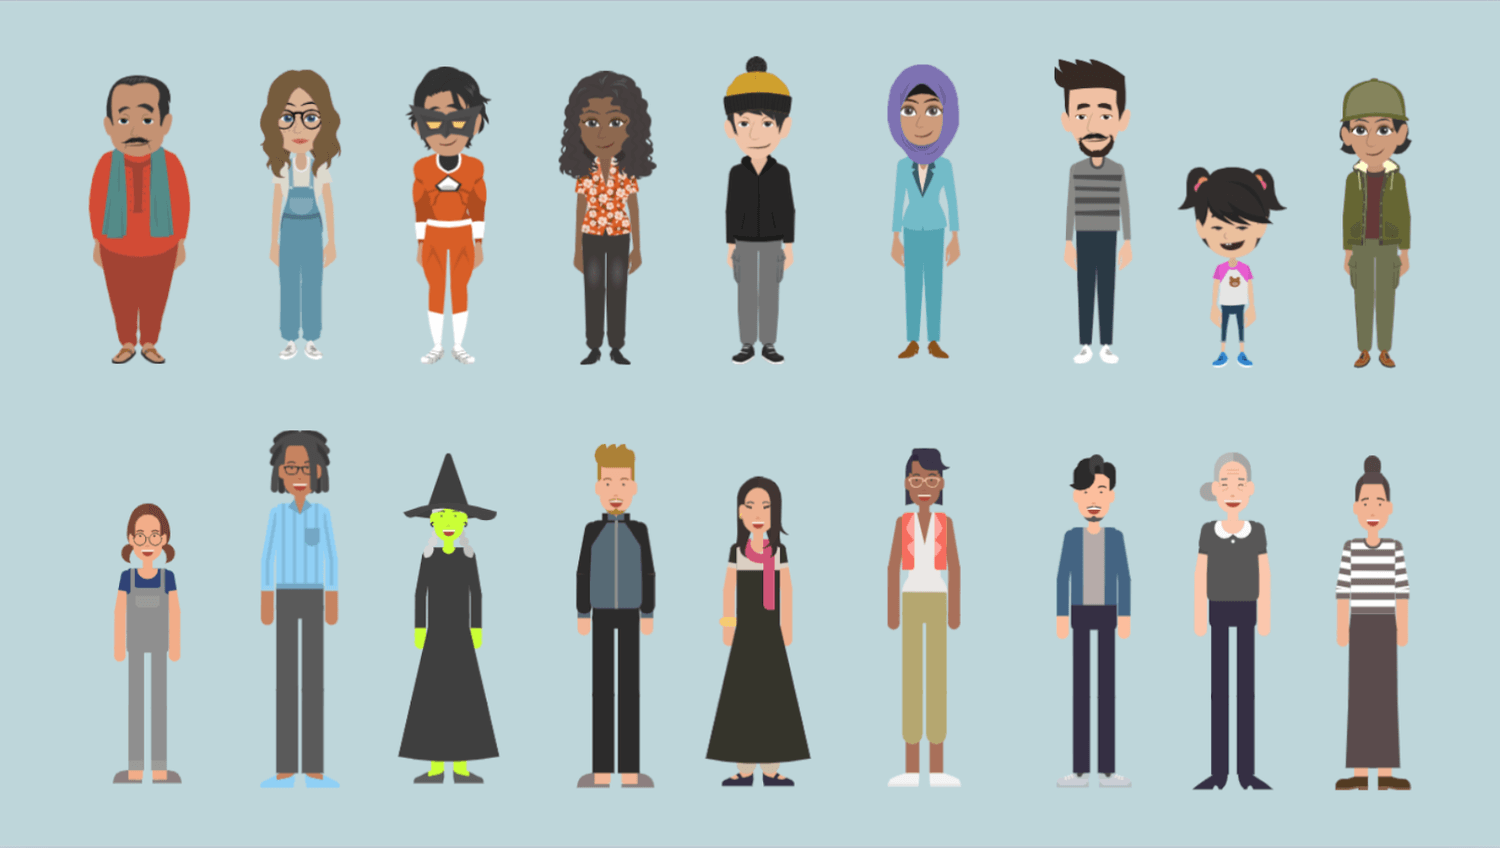 A series of animated characters in different outfits